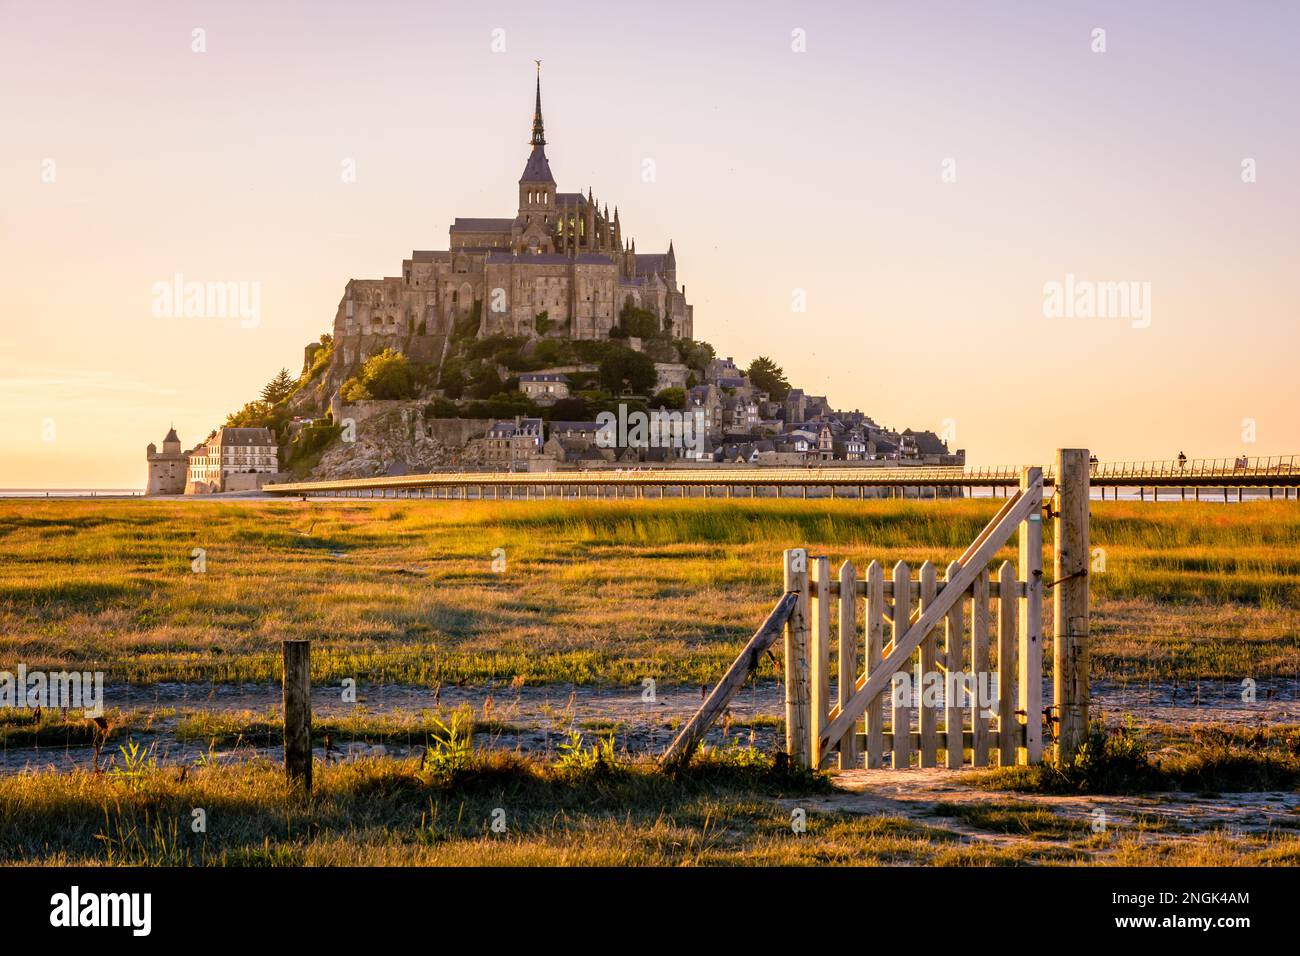 Sunset view of the Mont Saint-Michel tidal island in Normandy, France, with a wooden gate opening onto the salt meadows in the foreground. Stock Photo